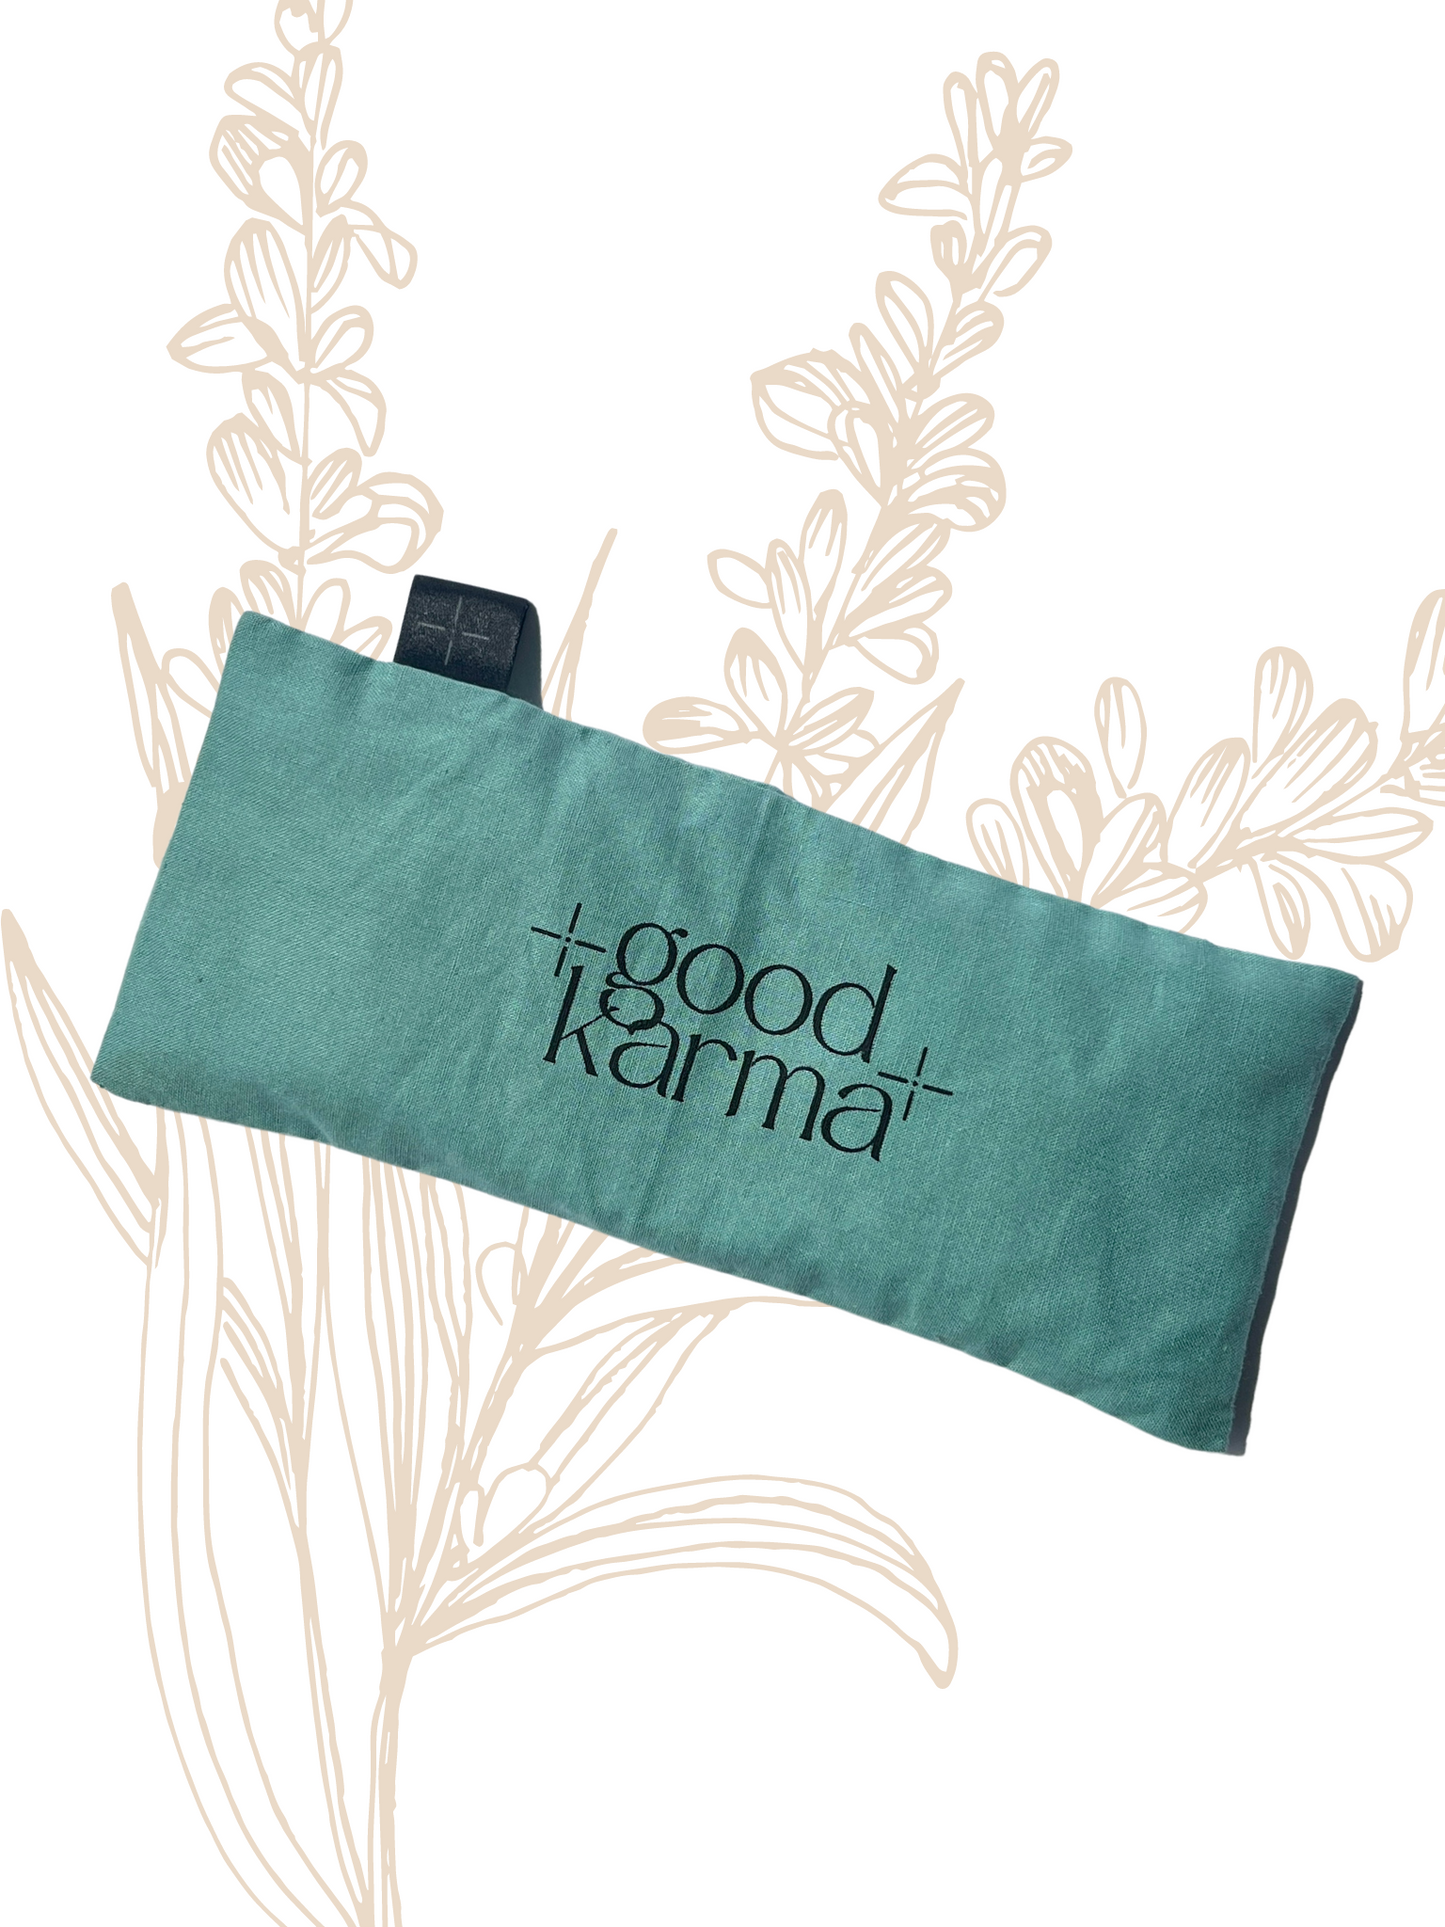 Good Karma organic flax and lavender eye pillows for meditation and relaxation greenish blue color Eye pillow for yoga and meditation on white background